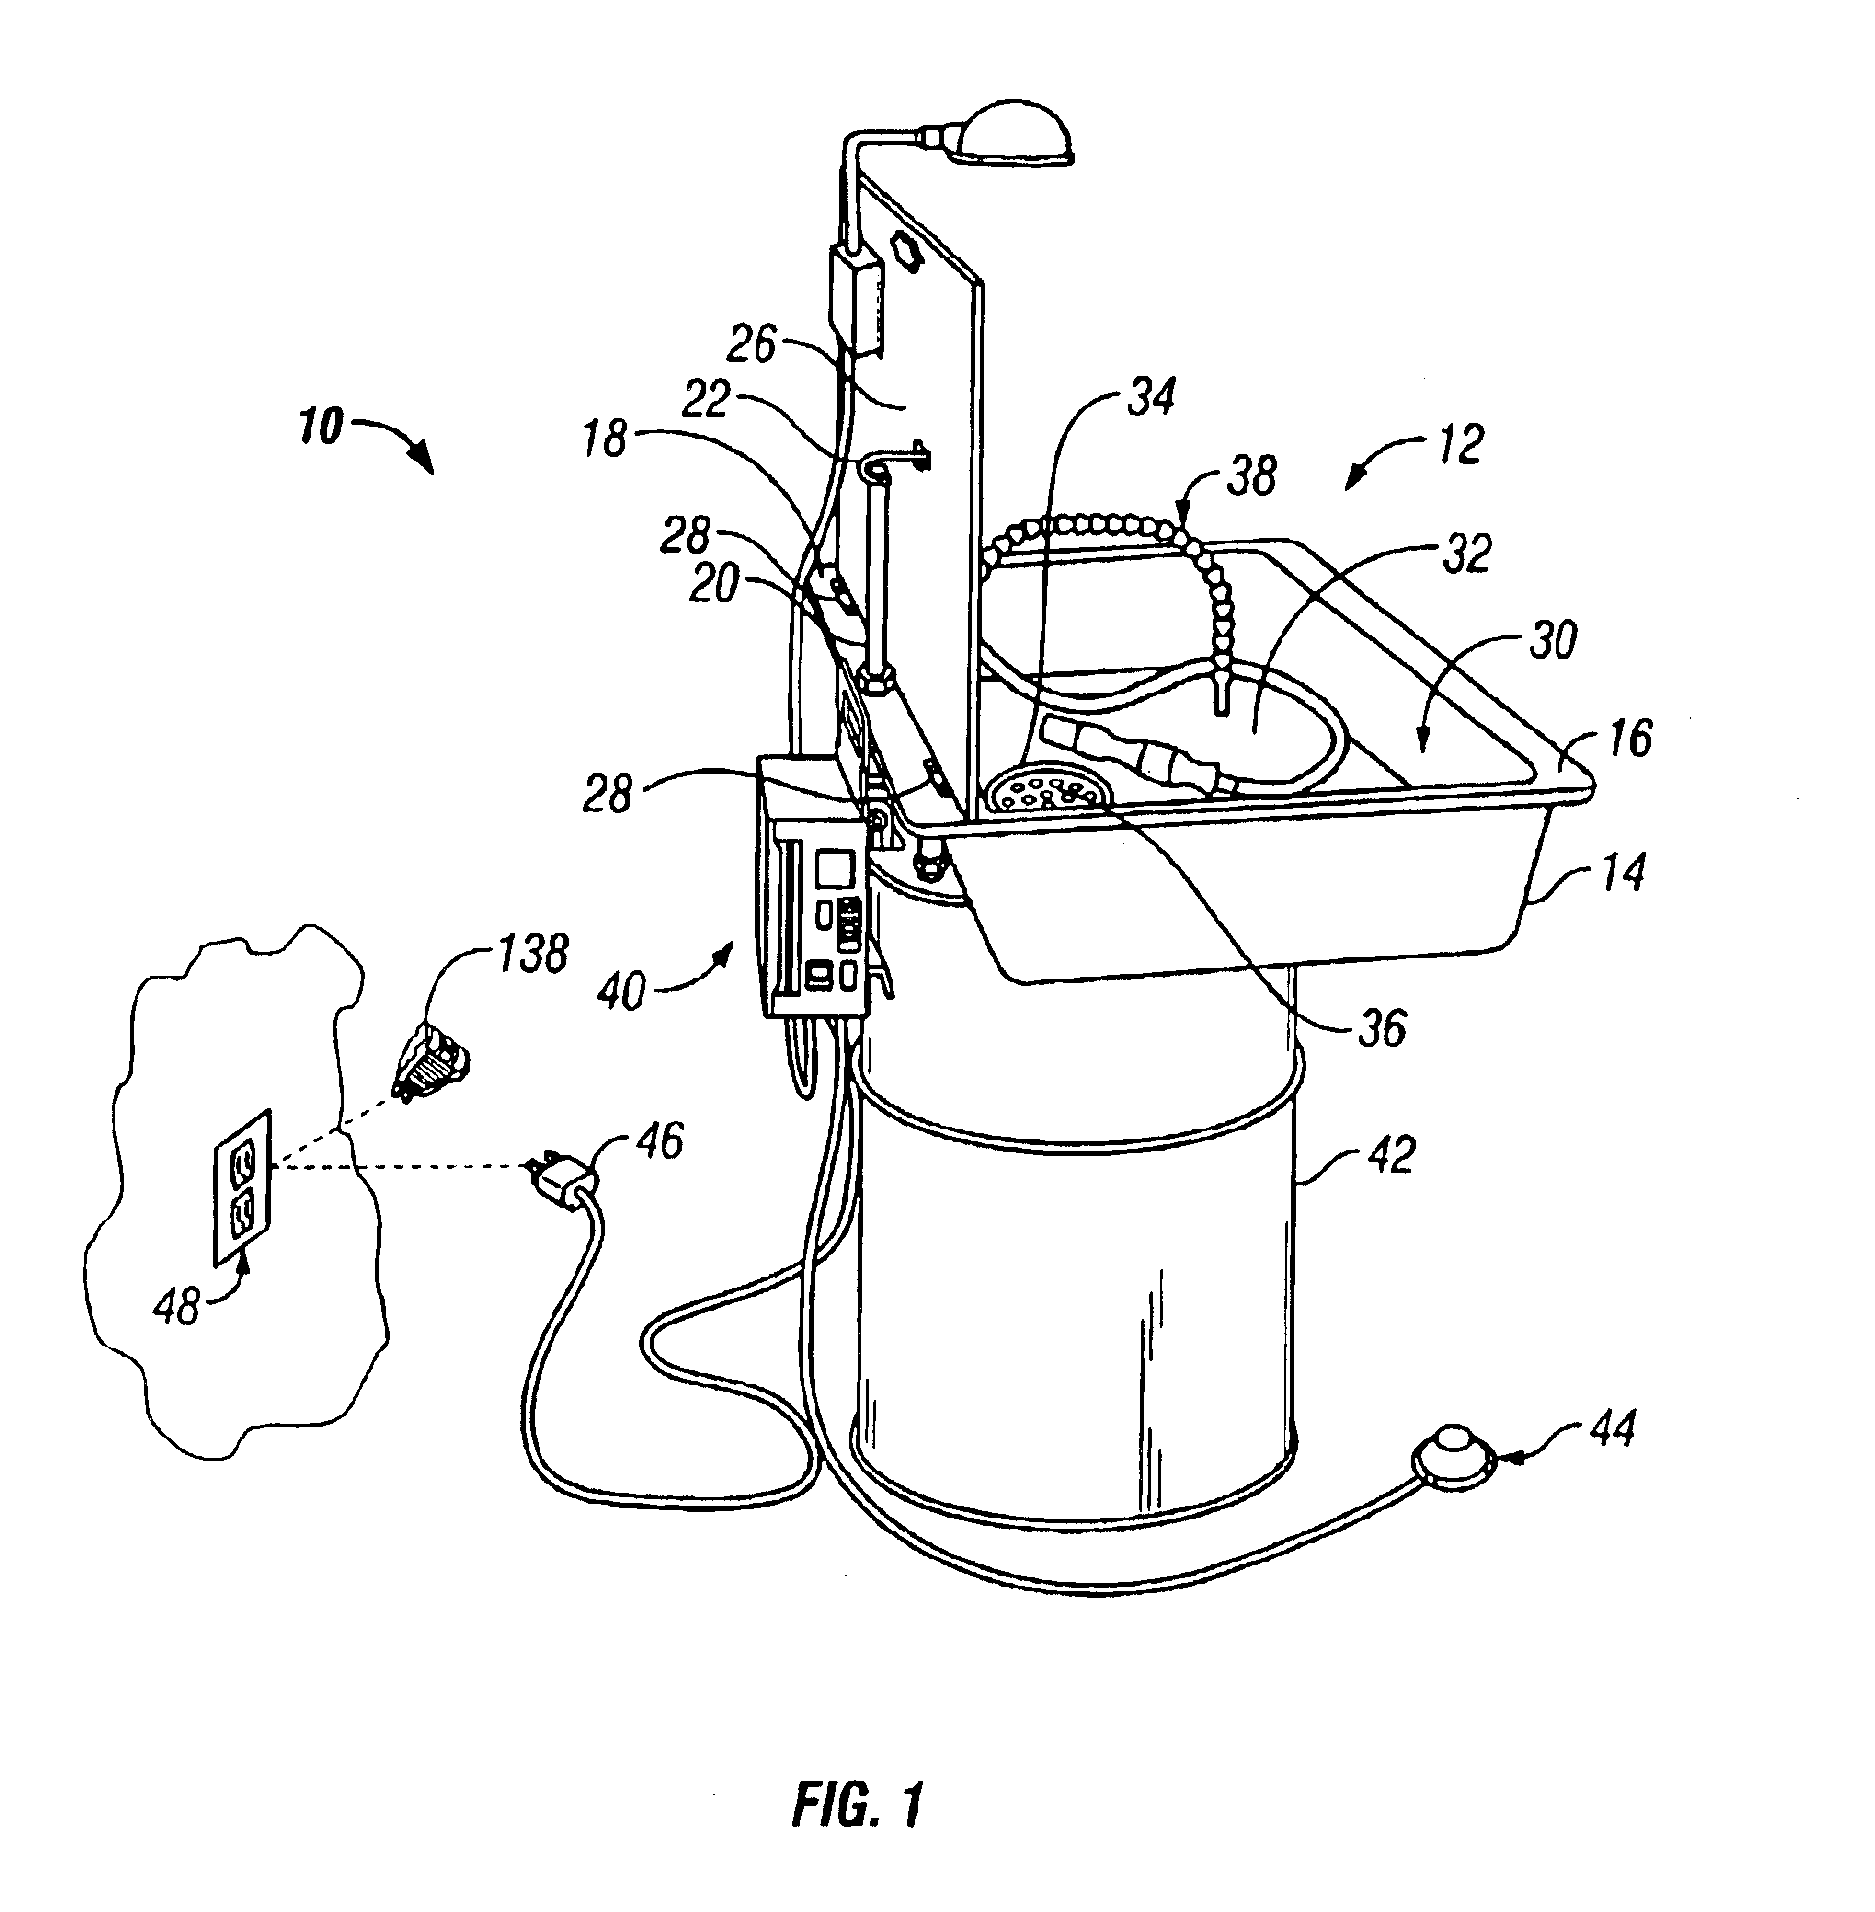 Parts washer with improved temperature and pump control